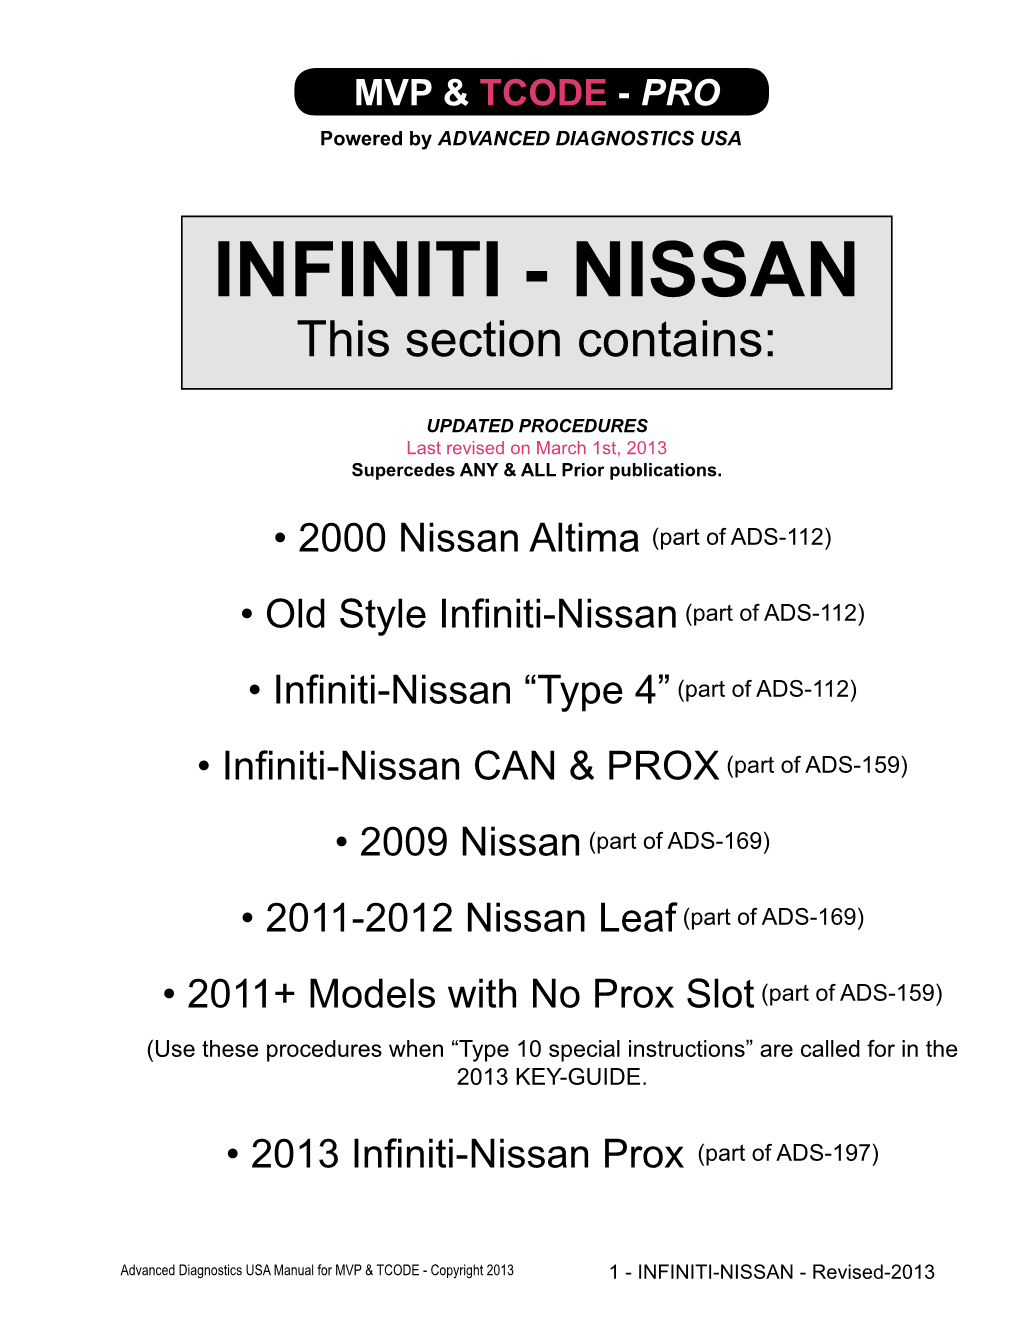 INFINITI - NISSAN This Section Contains